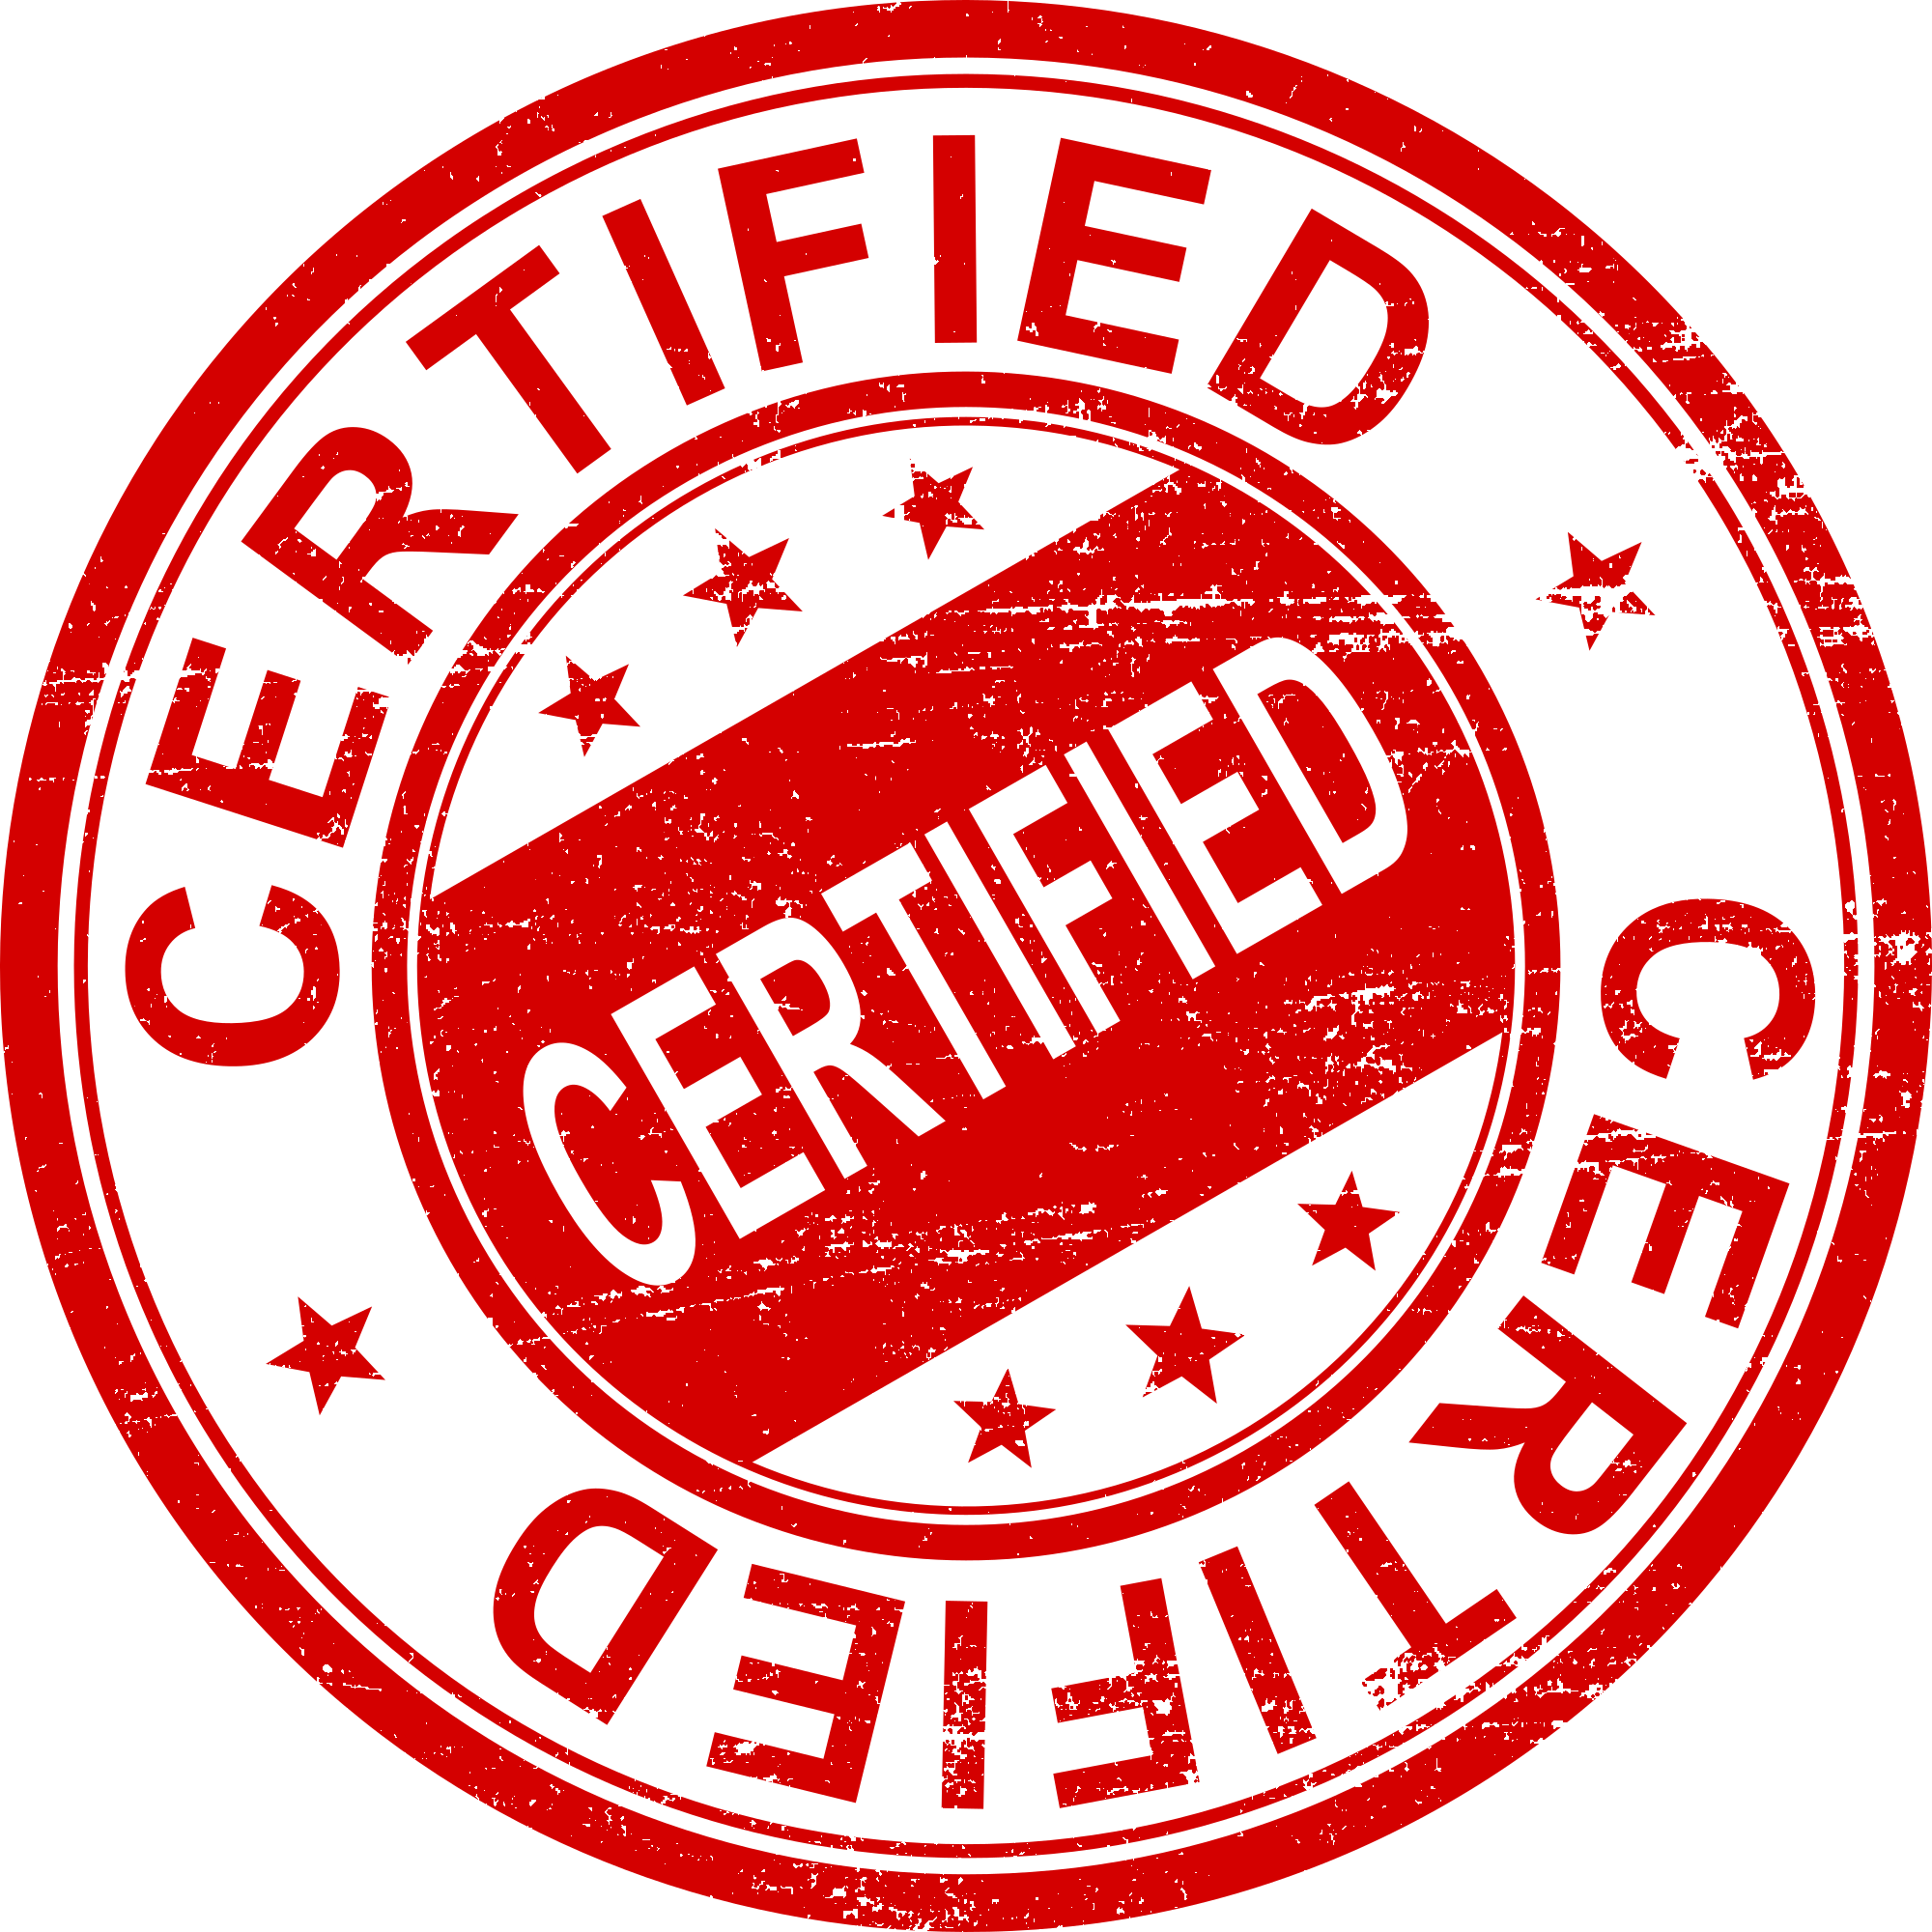 Certified Stamp  Transparent Clipart